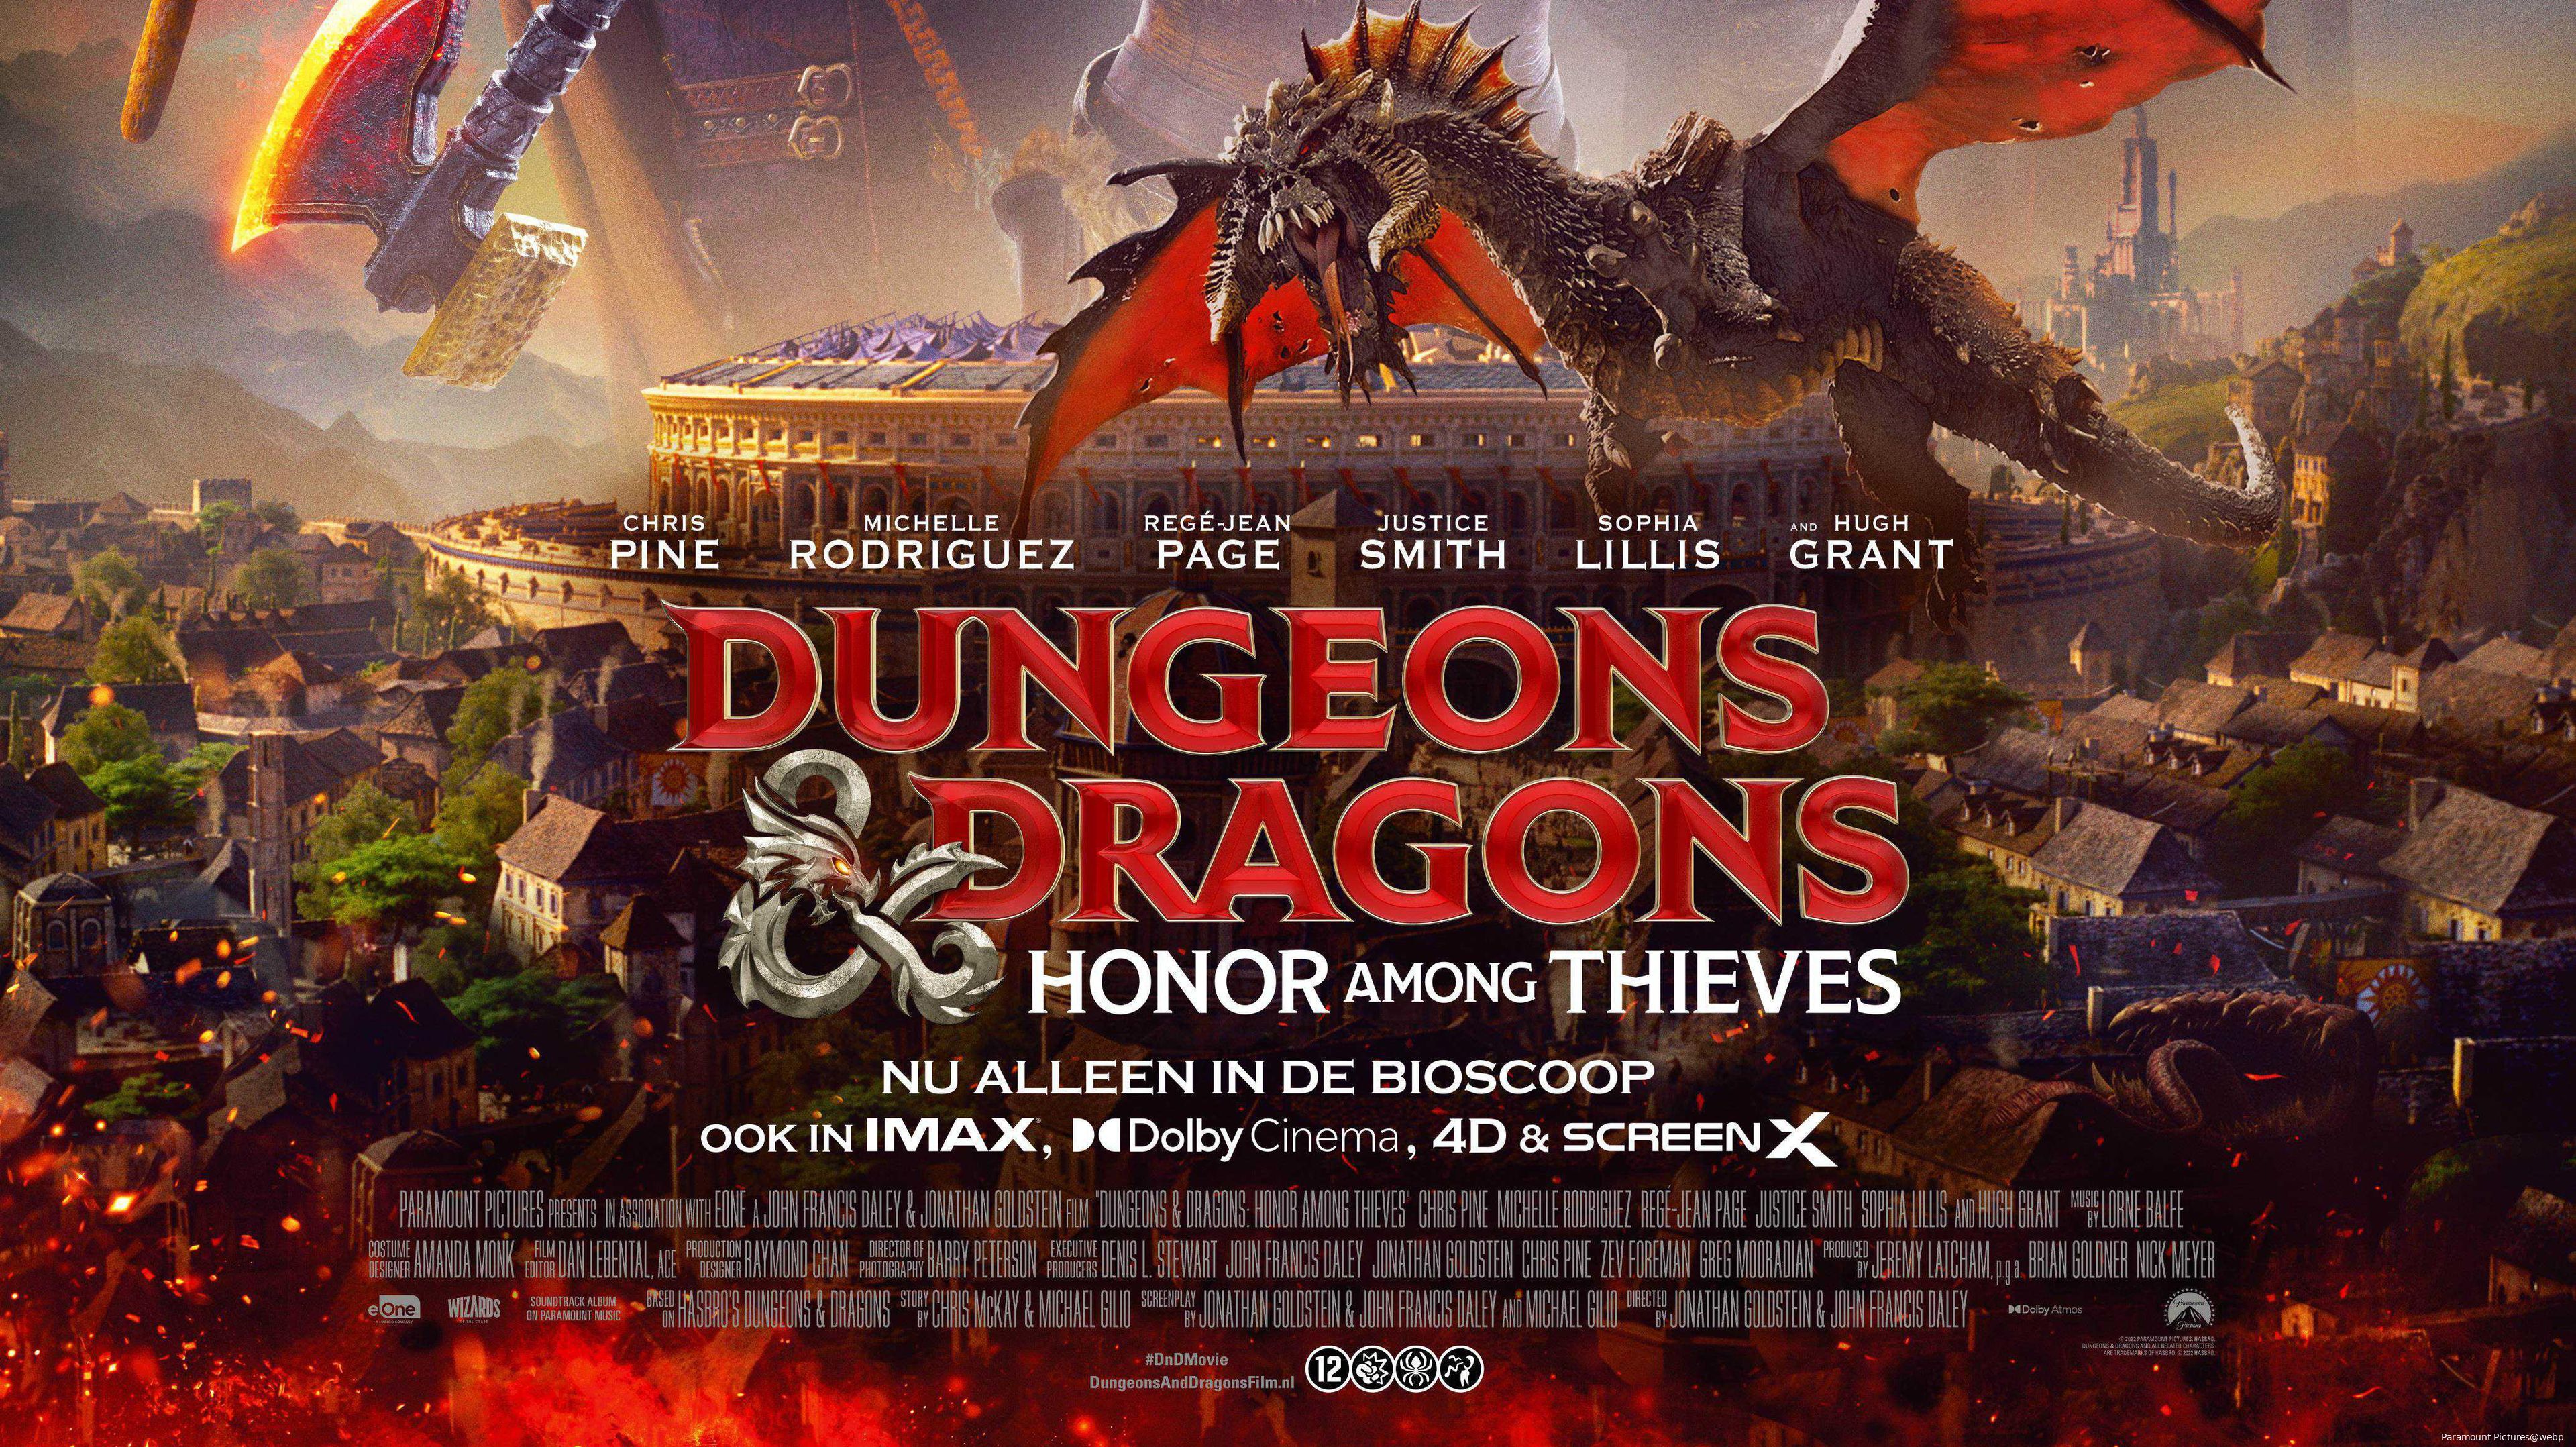 dungeons dragons honor among thieves ps 1 jpg sd high copyright 2022 paramount pictures hasbro dungeons dragons and all related characters are trademarks of hasbro 2022 hasbro 1f1680273932